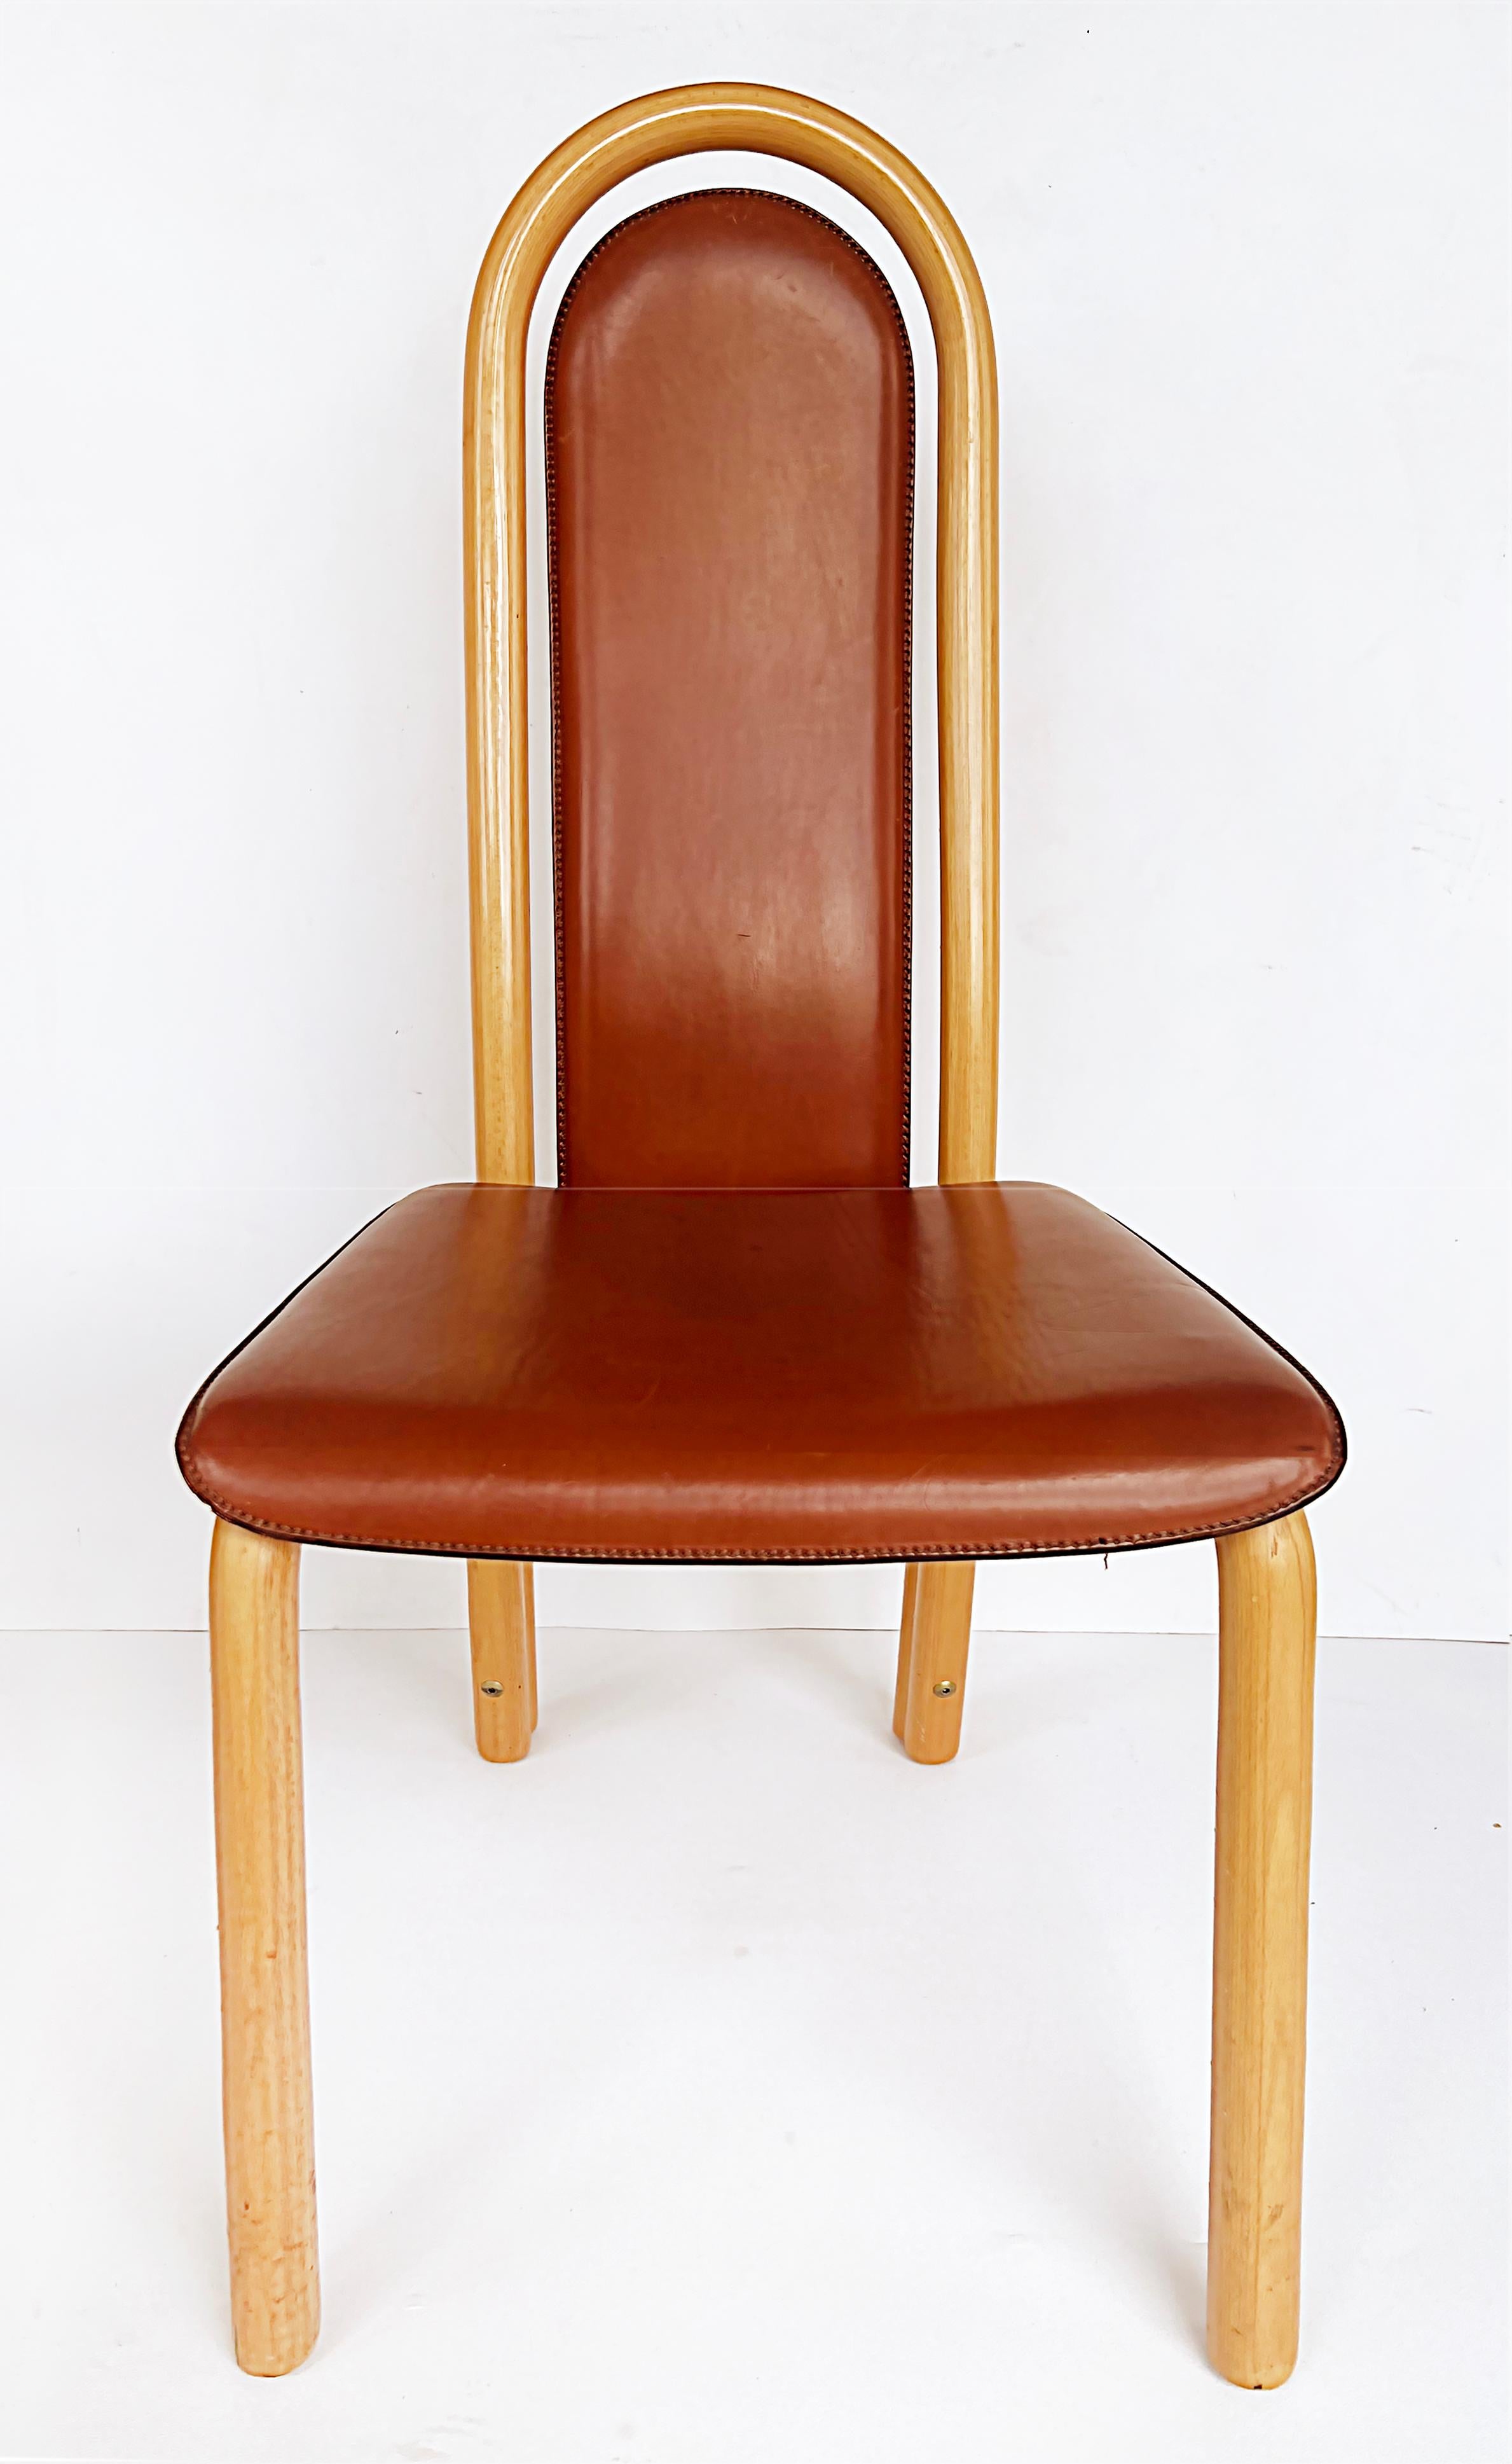 A. Sibau Italian Postmodern Stitched Leather Dining Chairs, Set of 6

Offered for sale is a set of 6 Postmodern A. Sibau Italian wood and leather dining chairs.  The chairs are heavy as they are substantially constructed in what we believe is